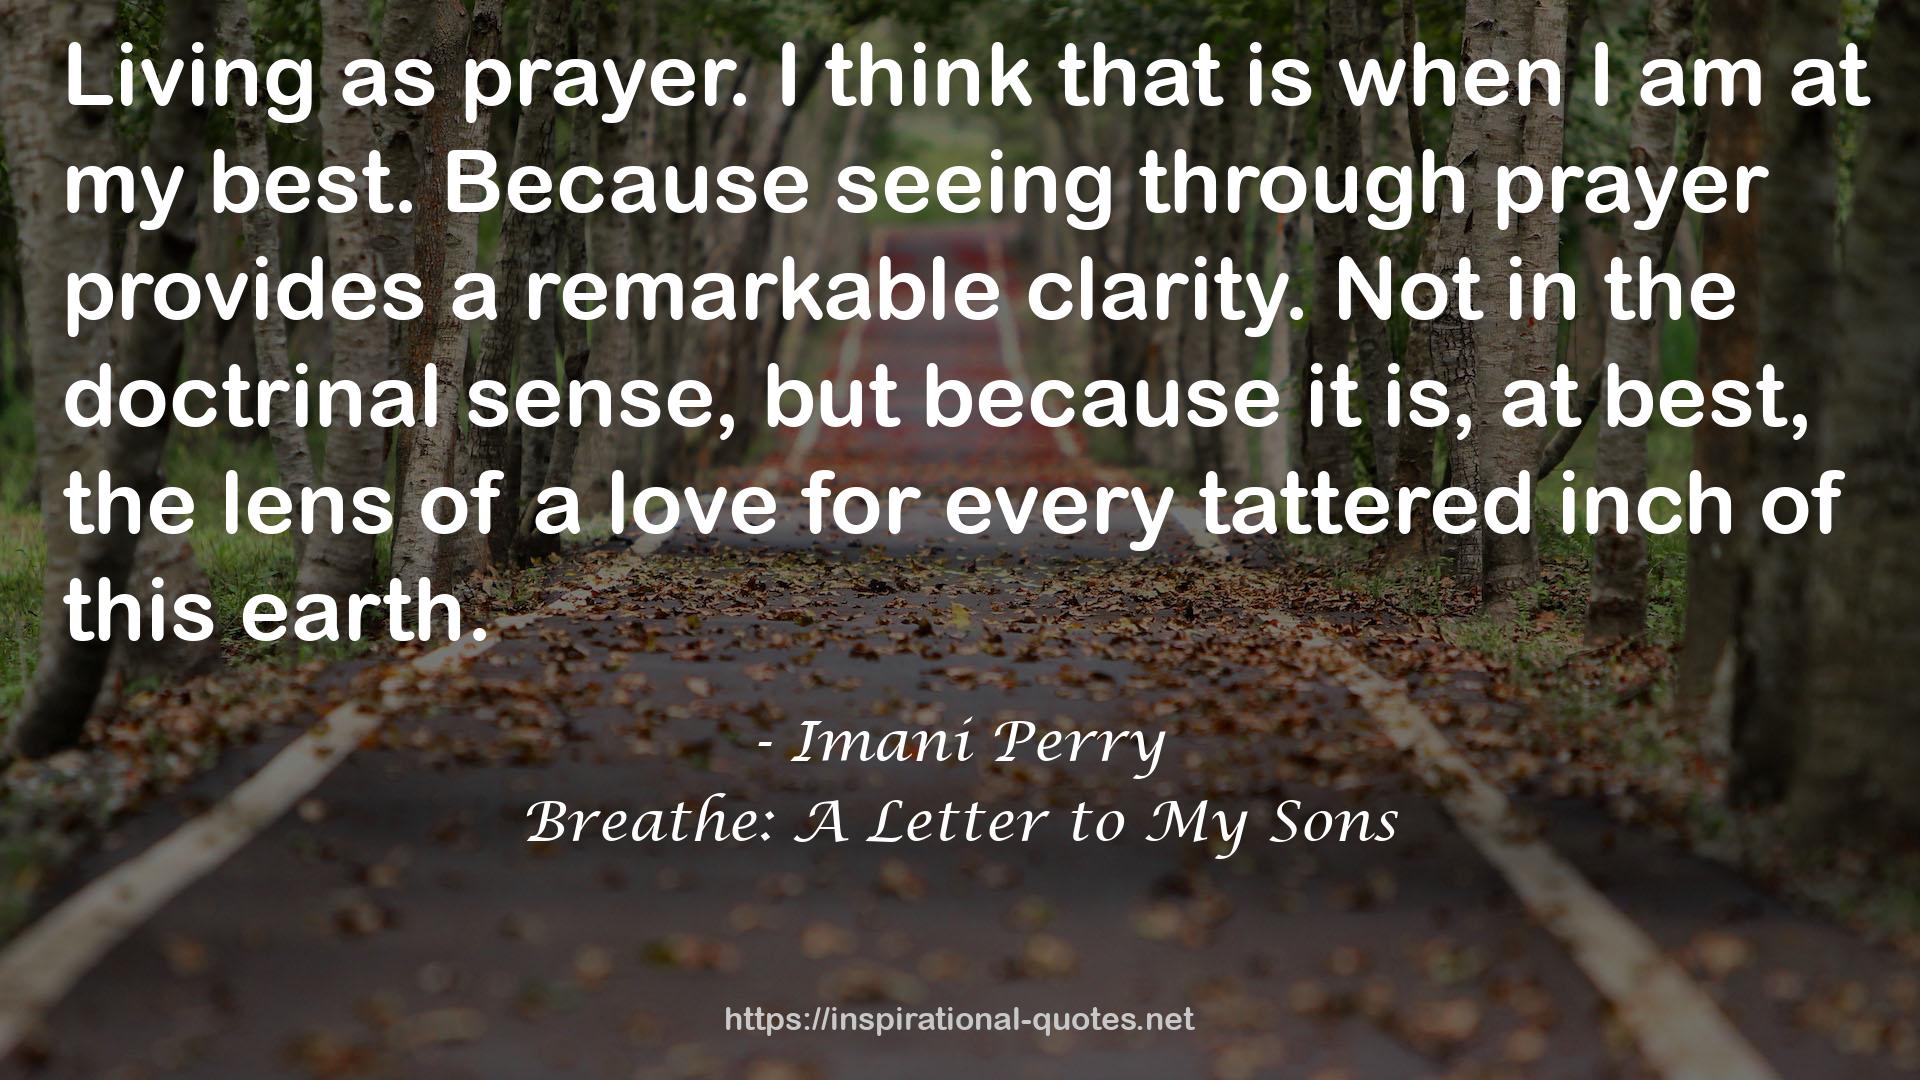 Breathe: A Letter to My Sons QUOTES